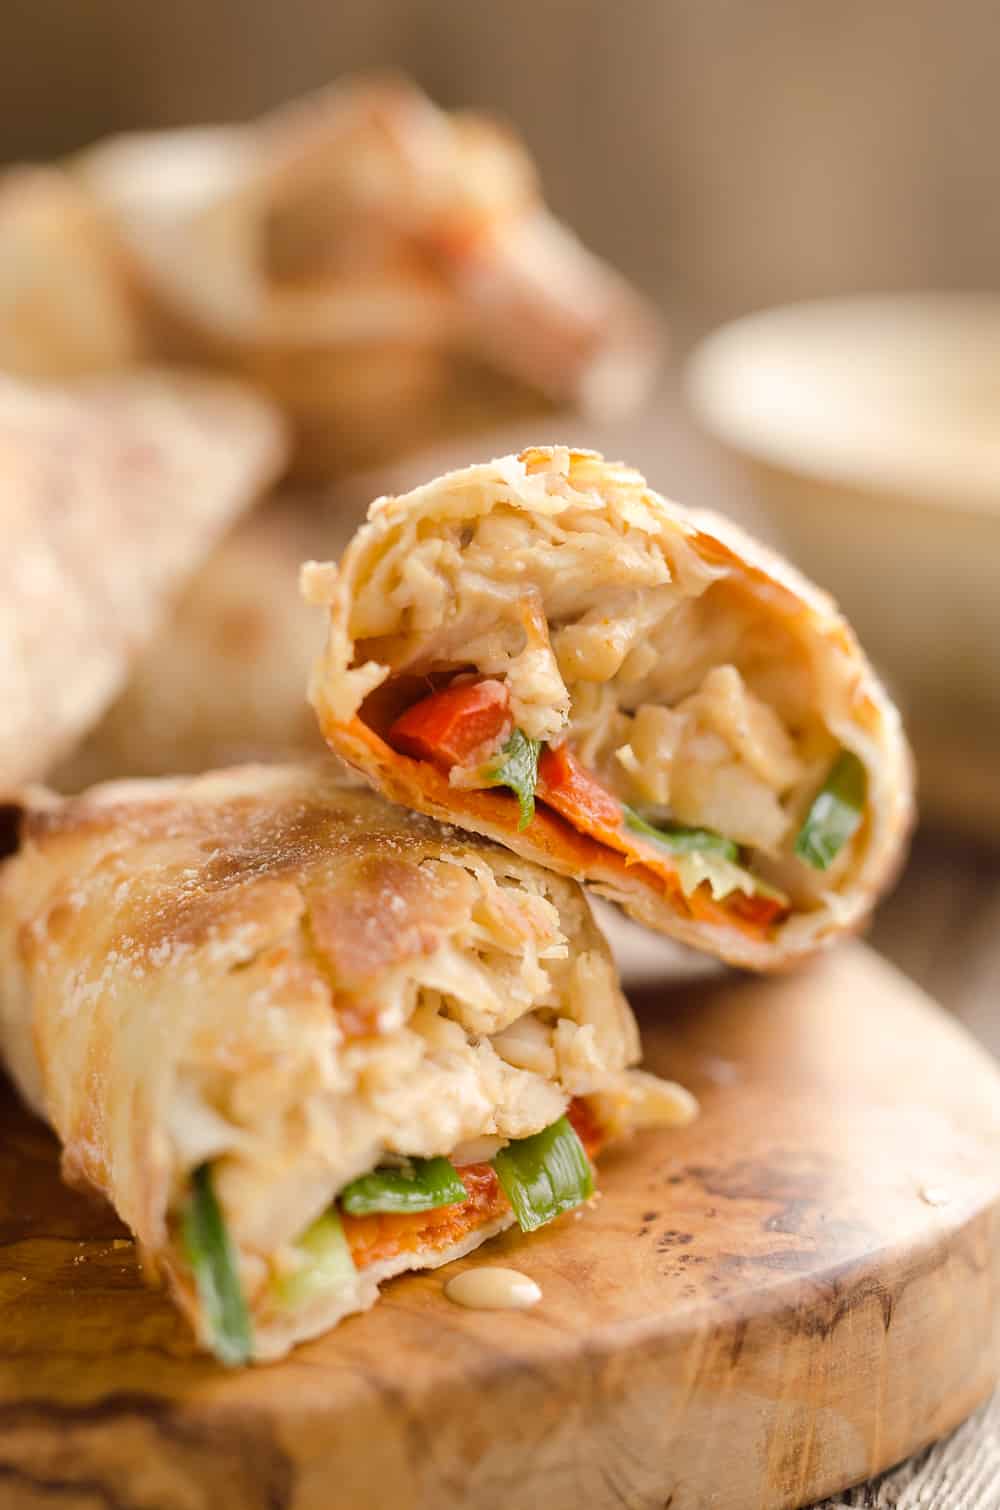 Airfryer Baked Thai Peanut Chicken Egg Rolls are a light and healthy recipe made in your Airfryer or oven. Chicken is tossed with creamy Thai peanut sauce, carrots, red peppers and green onions and rolled in crispy egg roll wrappers for a flavorful dinner you can make in just 20 minutes. 